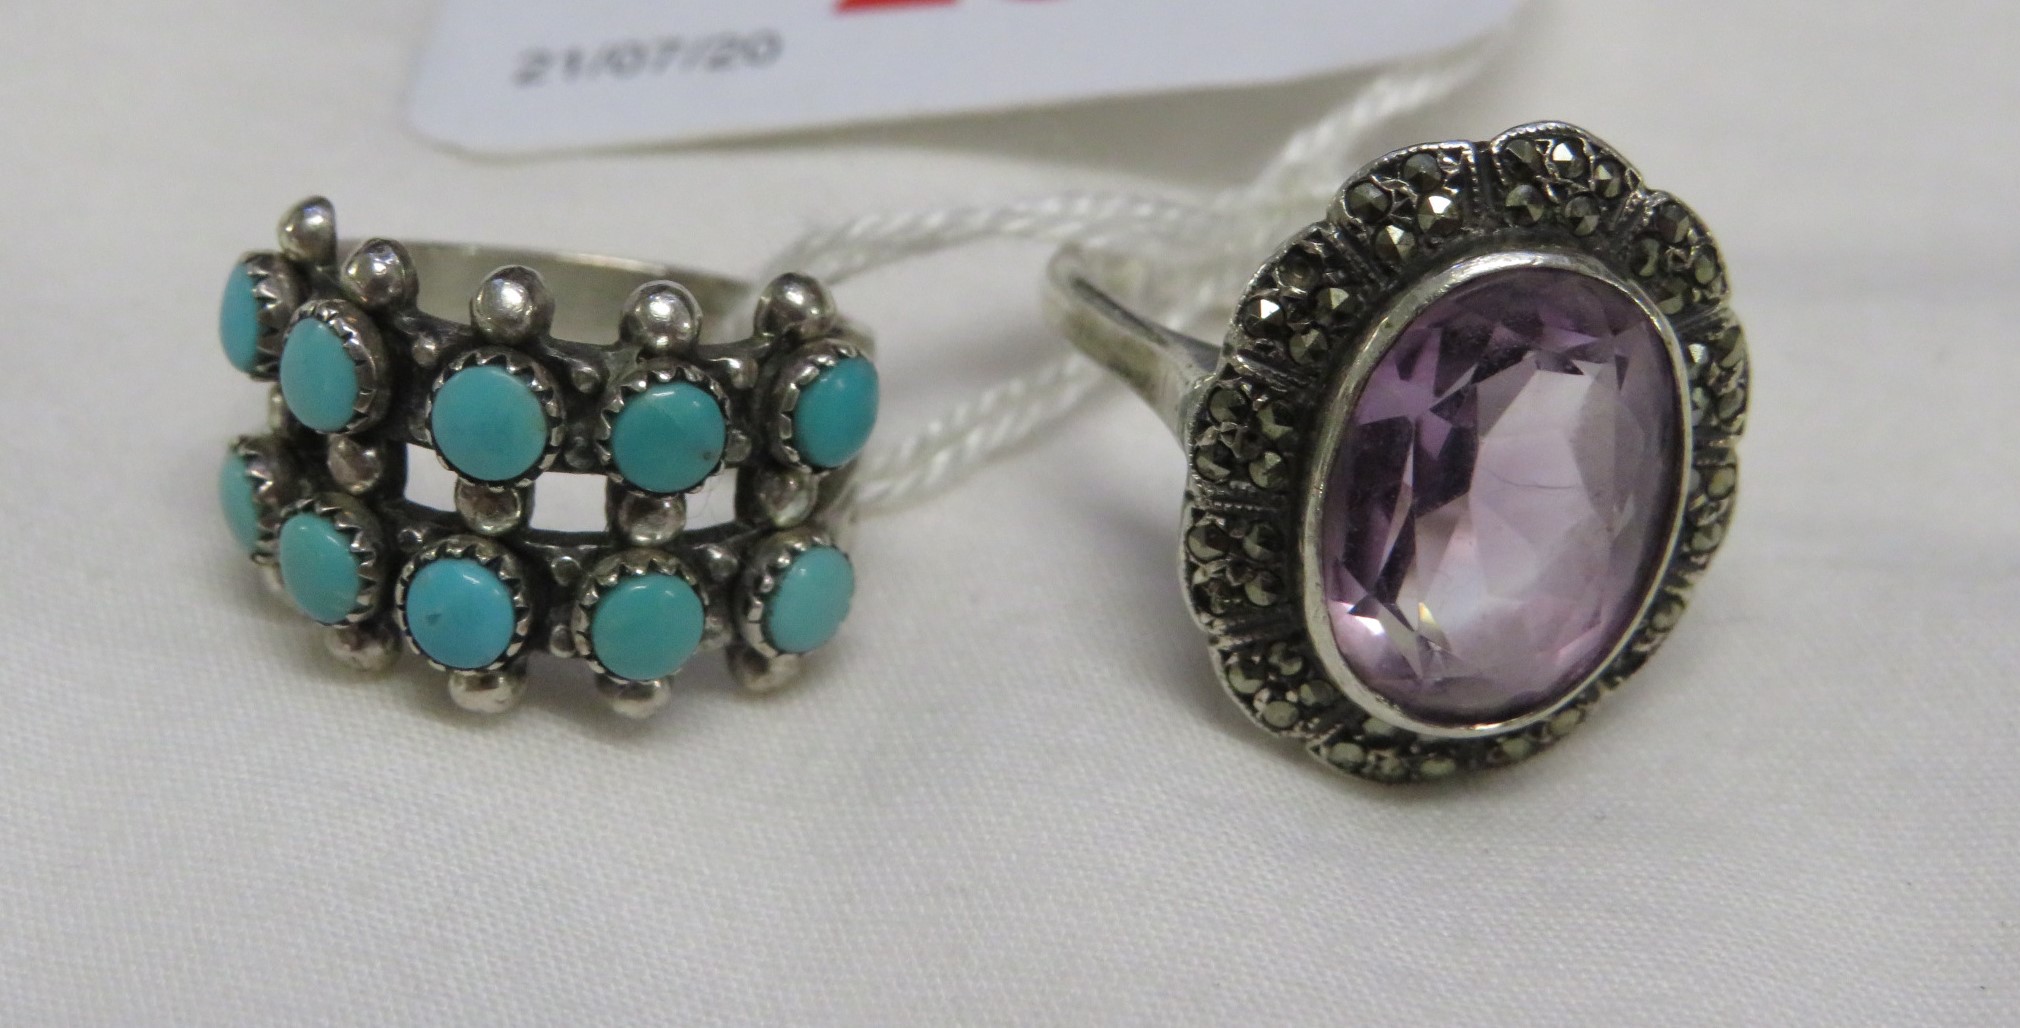 WHITE METAL RING SET WITH TURQUOISE AND STAMPED STERLING, AND A WHITE METAL AMETHYST AND MARCASITE